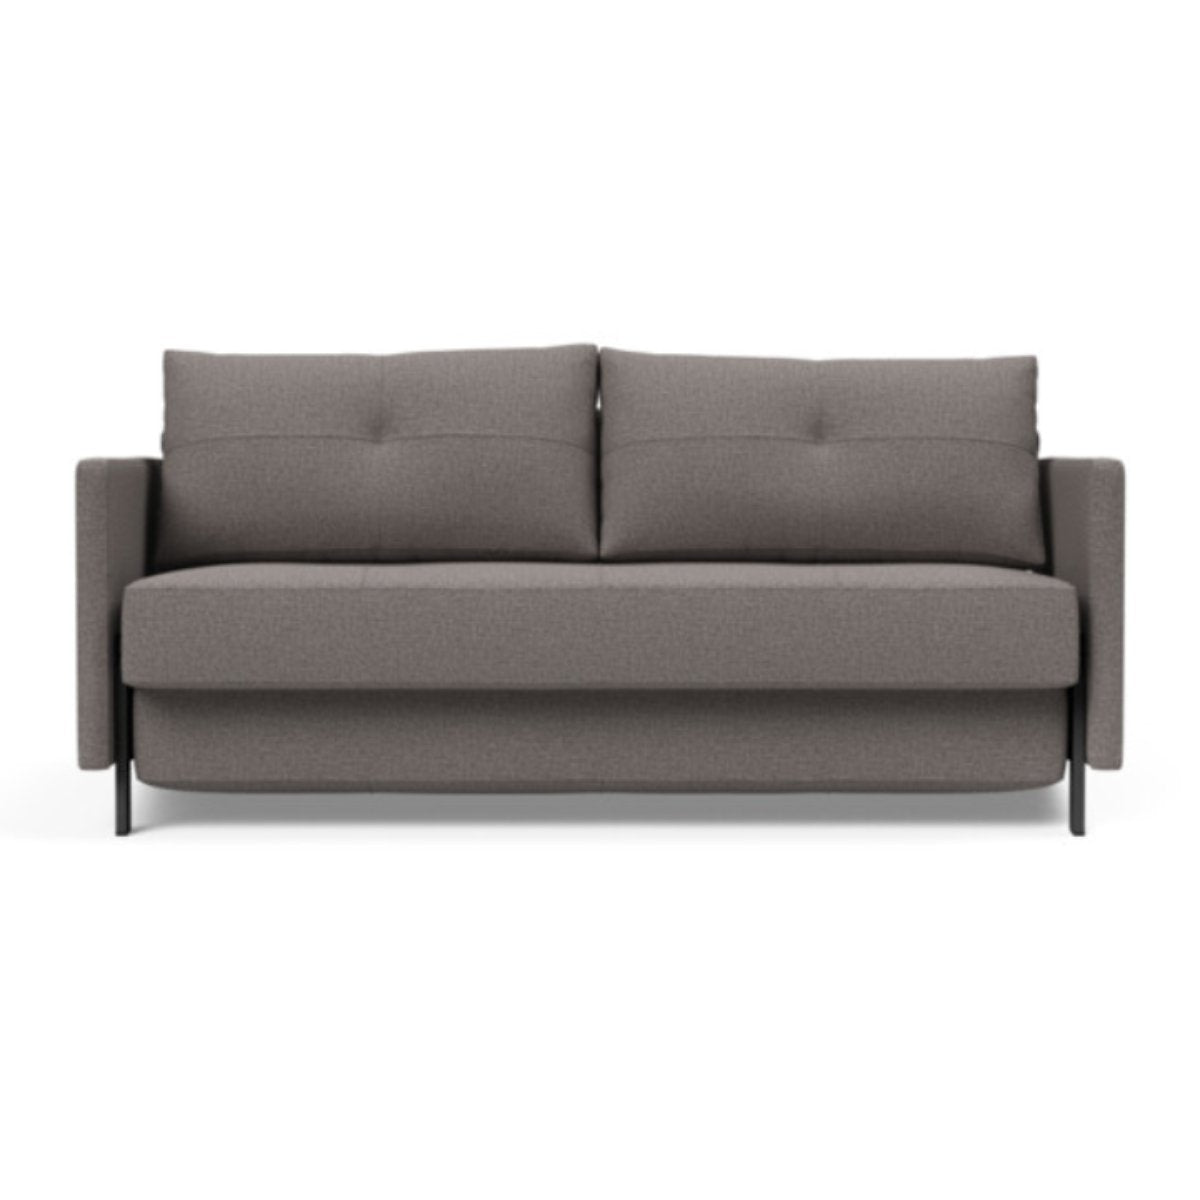 Load image into Gallery viewer, Cubed Queen Size Sofa Bed With Arms 521 Mixed Dance GreySofa Beds INNOVATION  521 Mixed Dance Grey   Four Hands, Burke Decor, Mid Century Modern Furniture, Old Bones Furniture Company, Old Bones Co, Modern Mid Century, Designer Furniture, https://www.oldbonesco.com/
